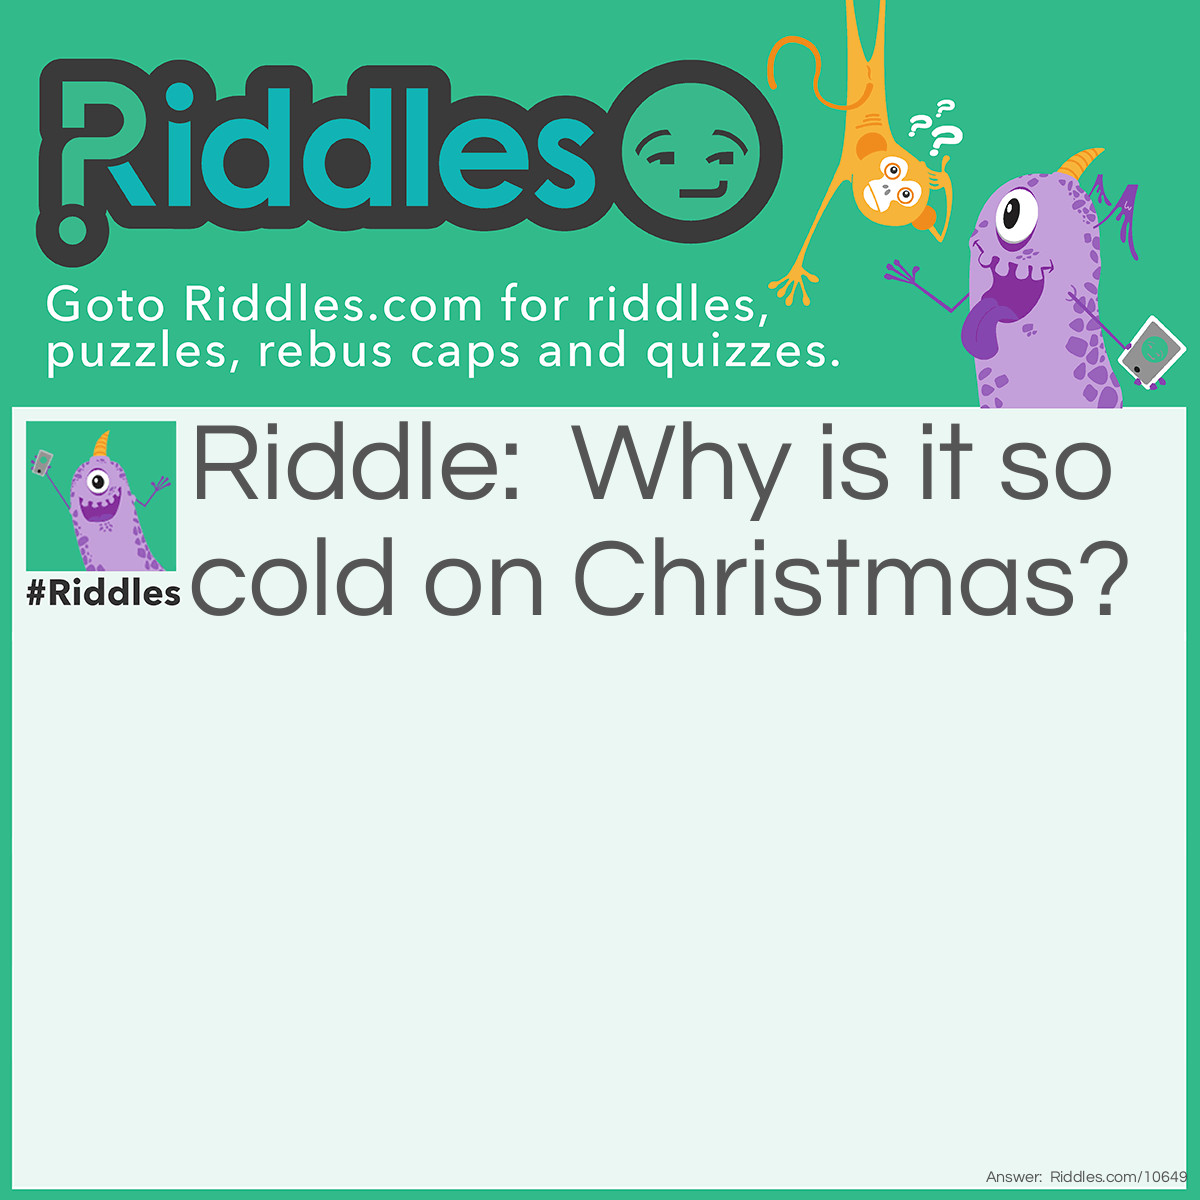 Riddle: Why is it so cold on Christmas? Answer: Because it's in Decembrrr!